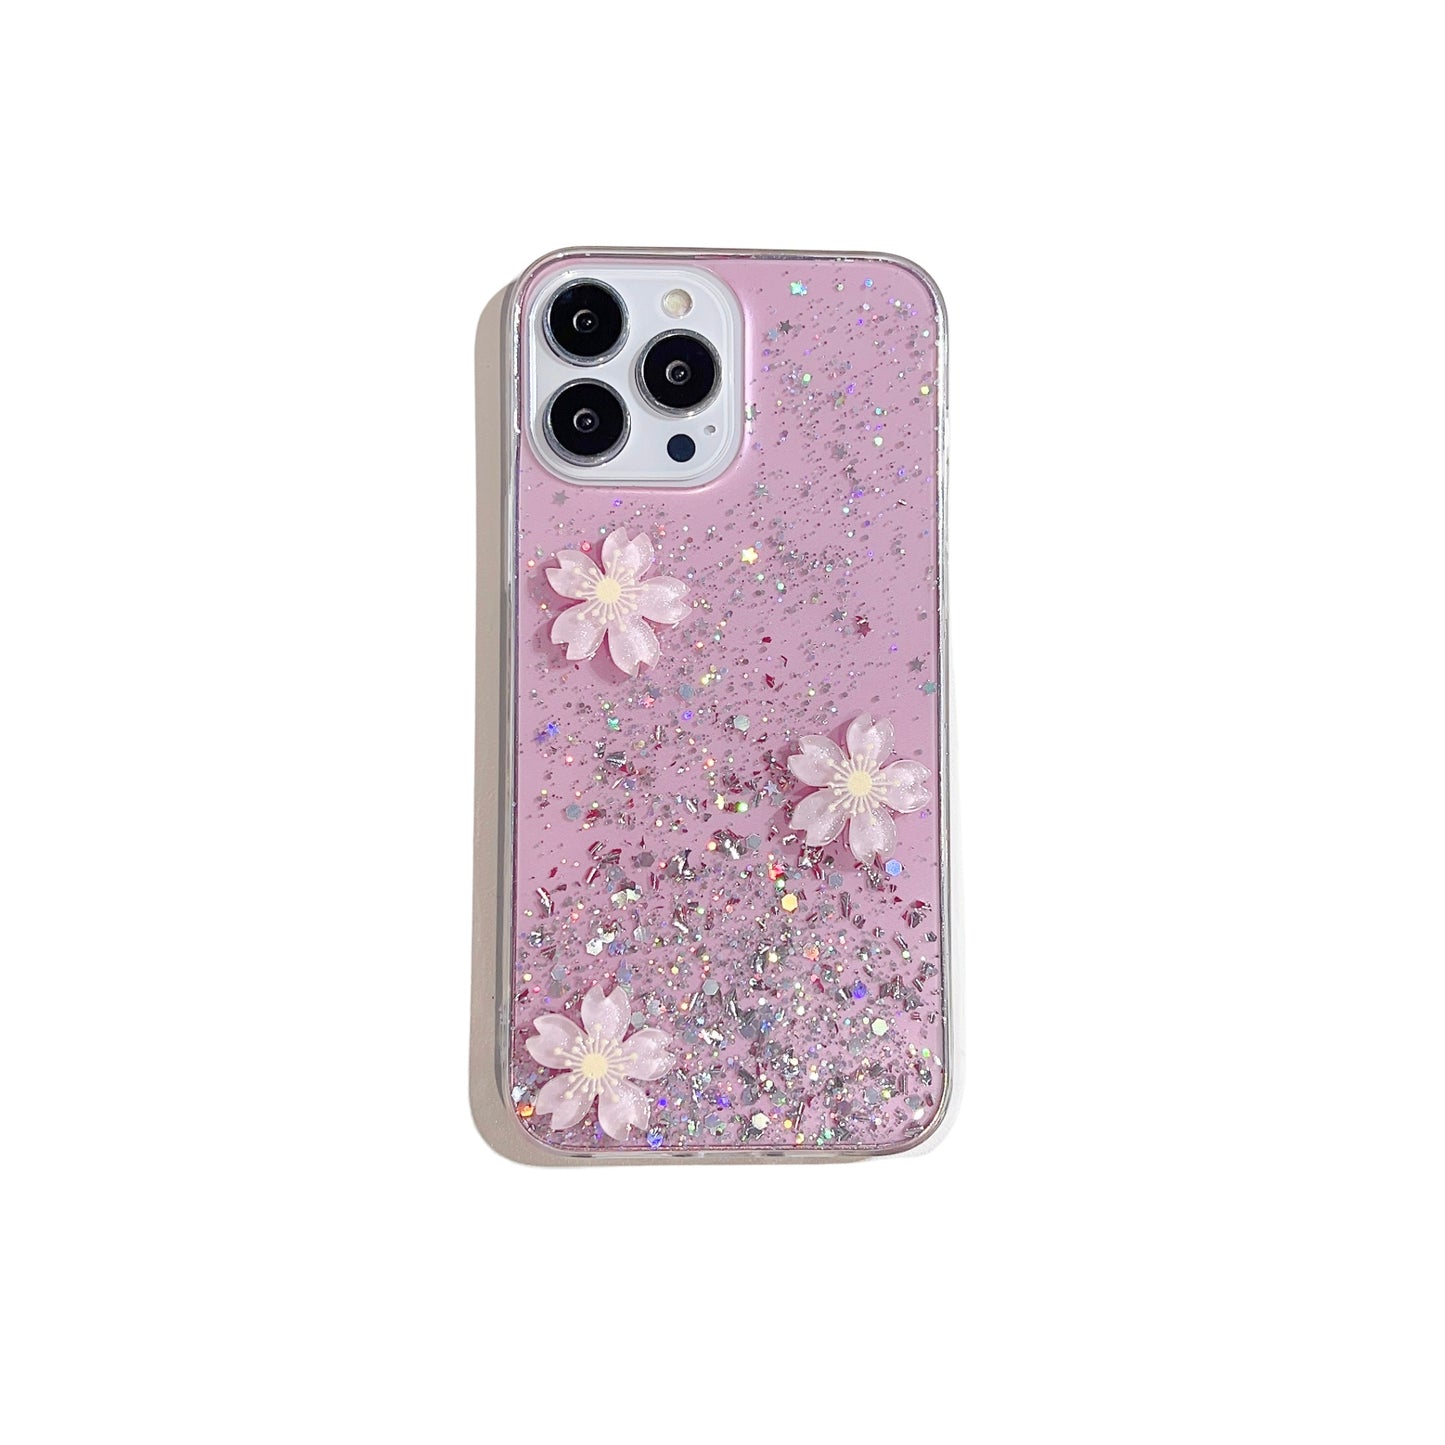 Floral Style Fresh Little Plum Blossom Phone Case For Iphone Vivo Oppo Huawei Samsung Xiaomi